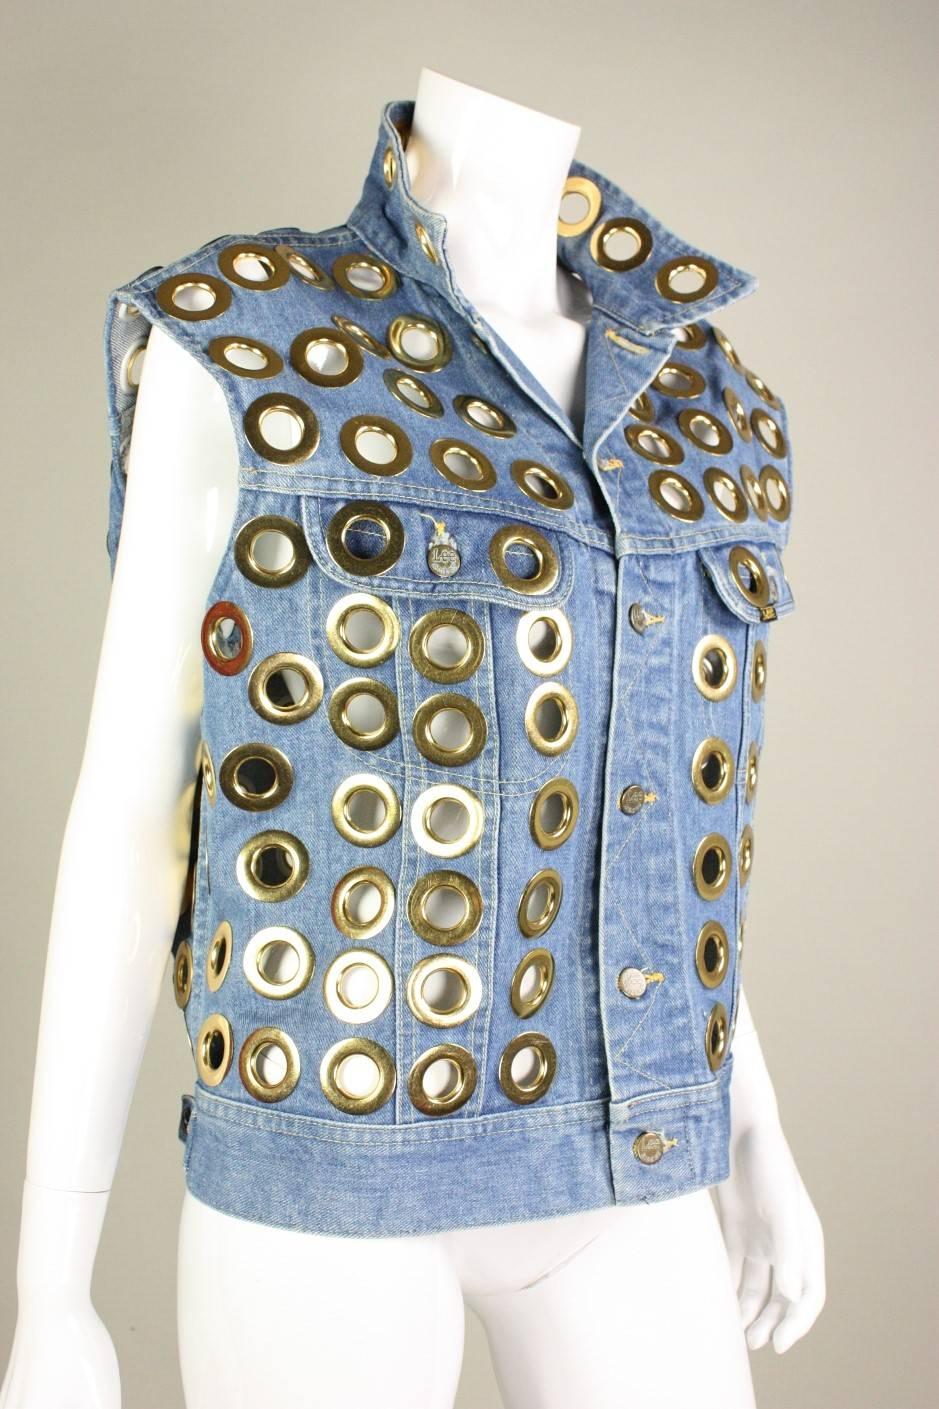 Vintage vest from Fred Hayman dates to the 1980's and was repurposed from a denim vest from Lee.  It is covered with extra large gold-toned grommets throughout.  Unlined.  Center front button closure. 

Measurements-
Chest: 48